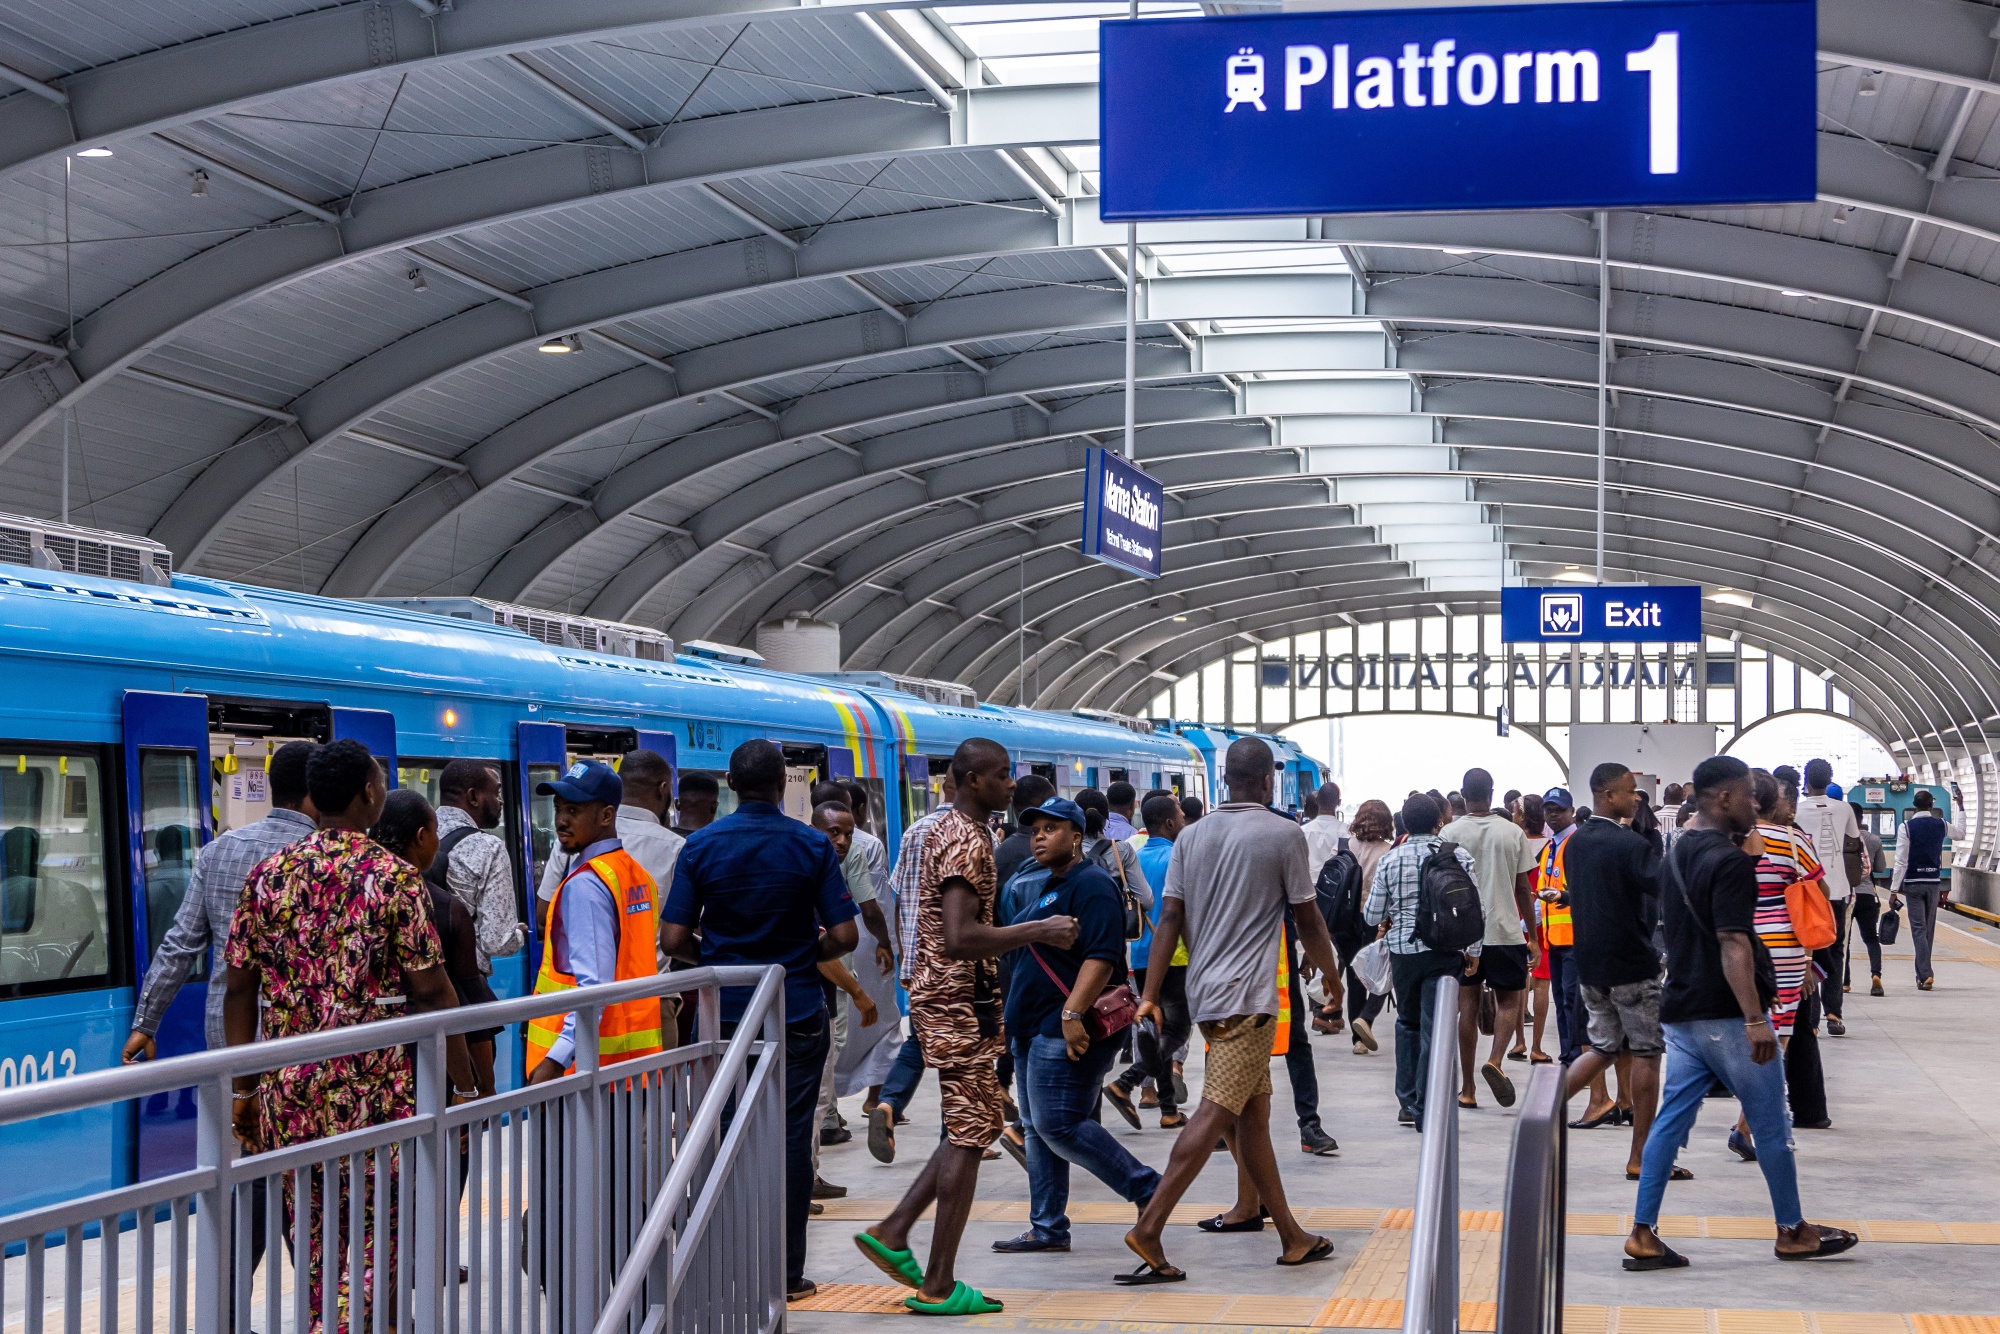 Lagos First Metro Line Opens to Tackle City Gridlock